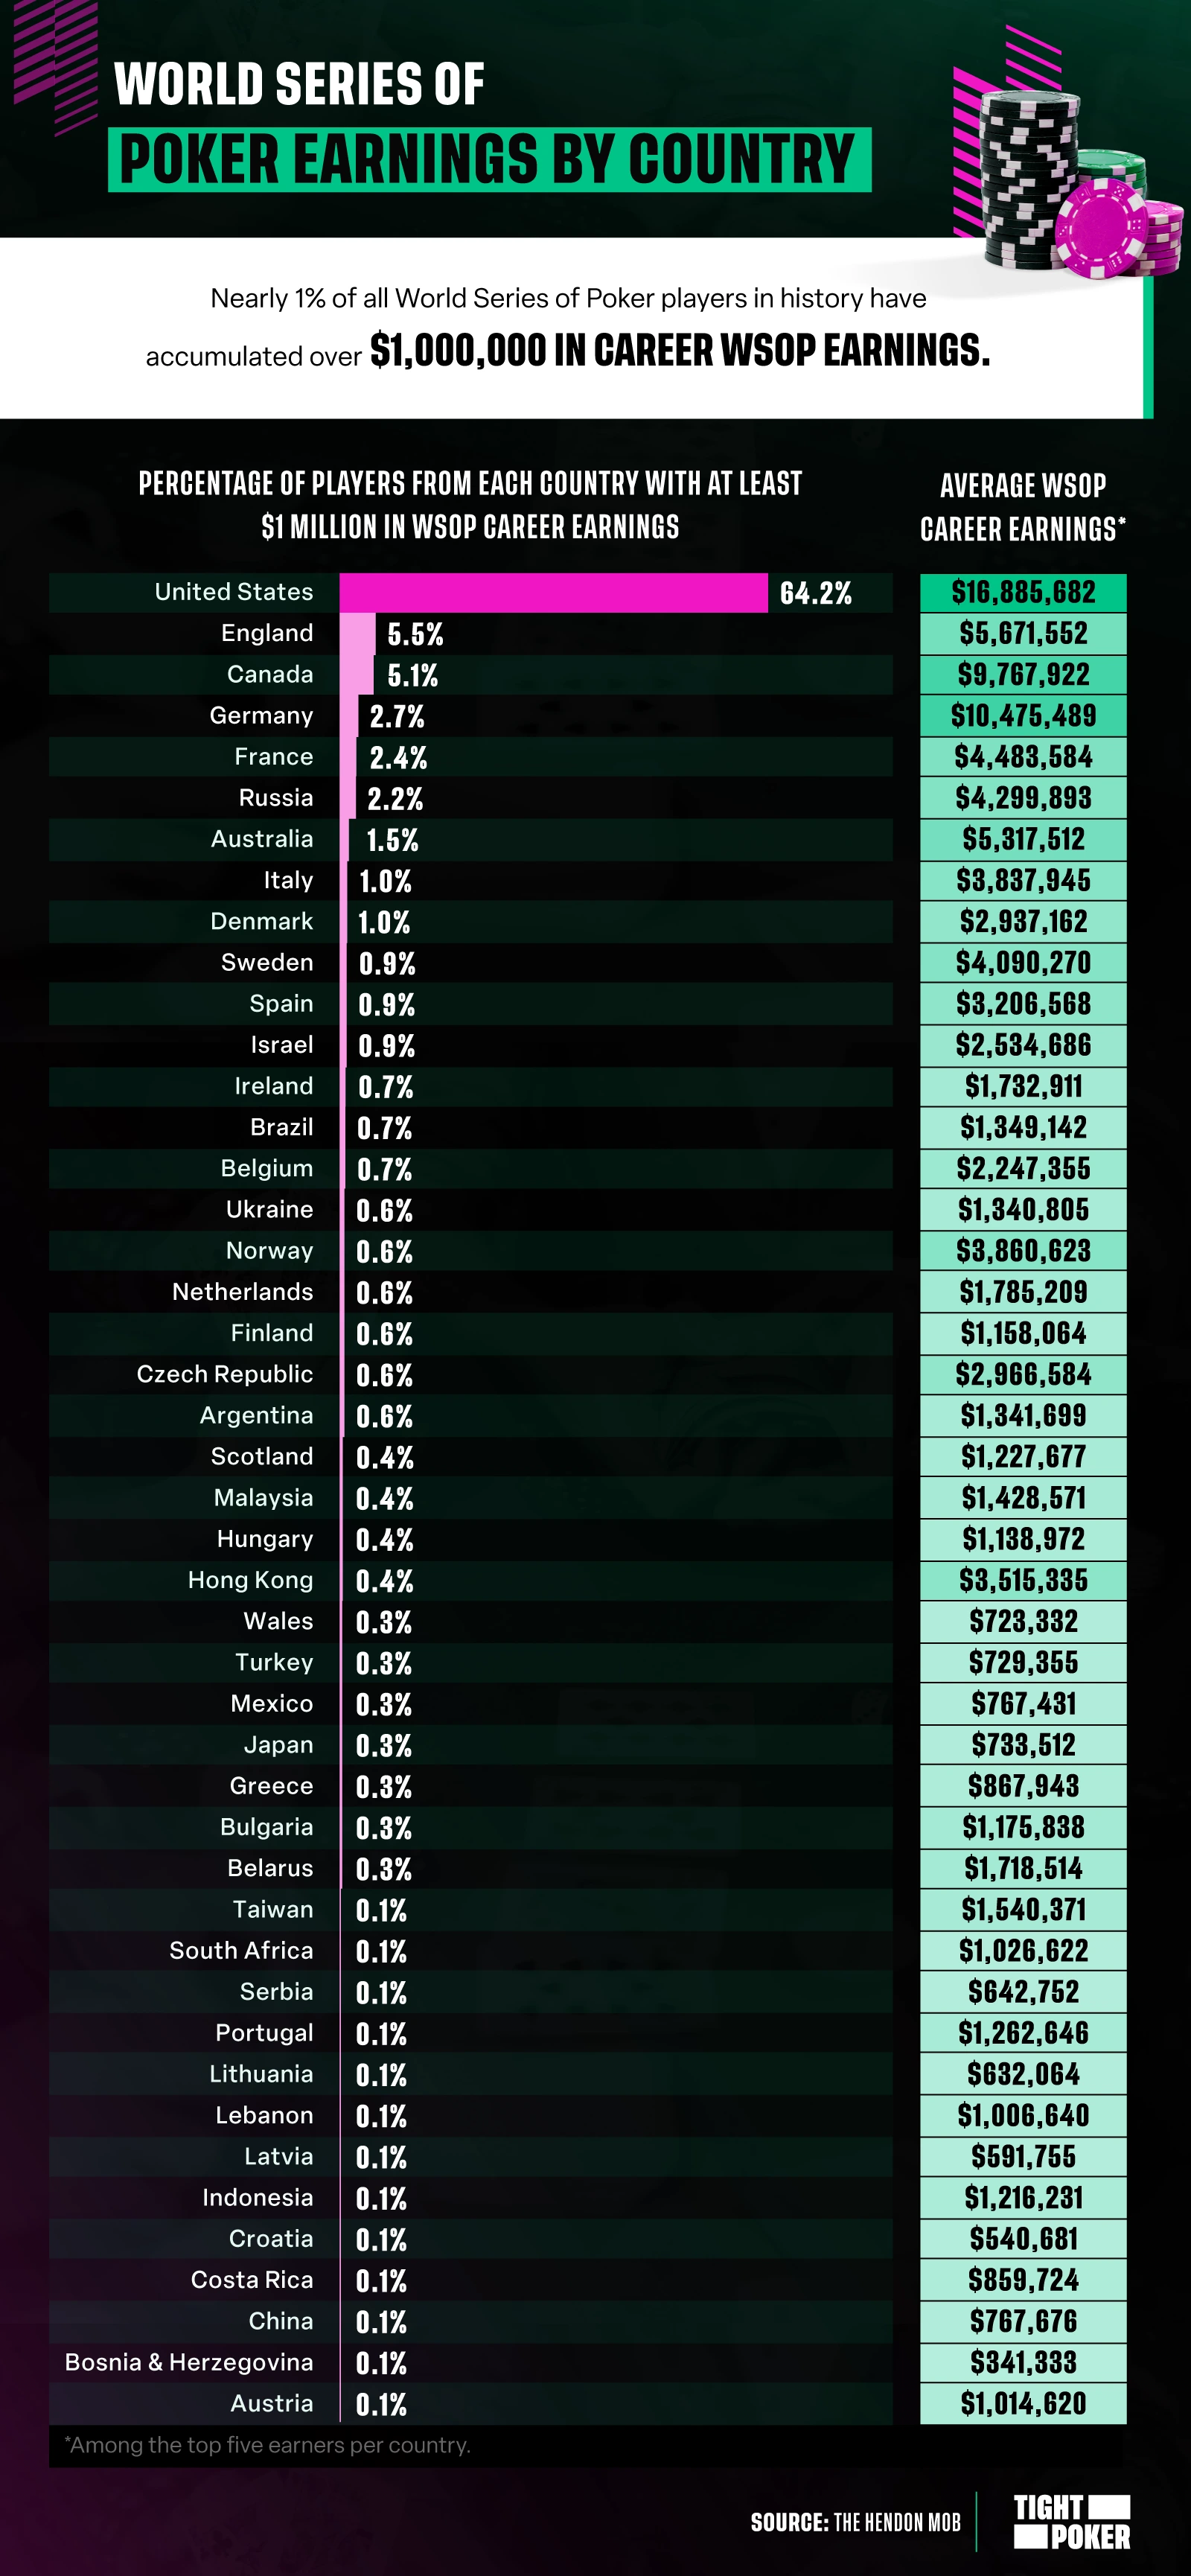 World Series of Poker Earnings by Country